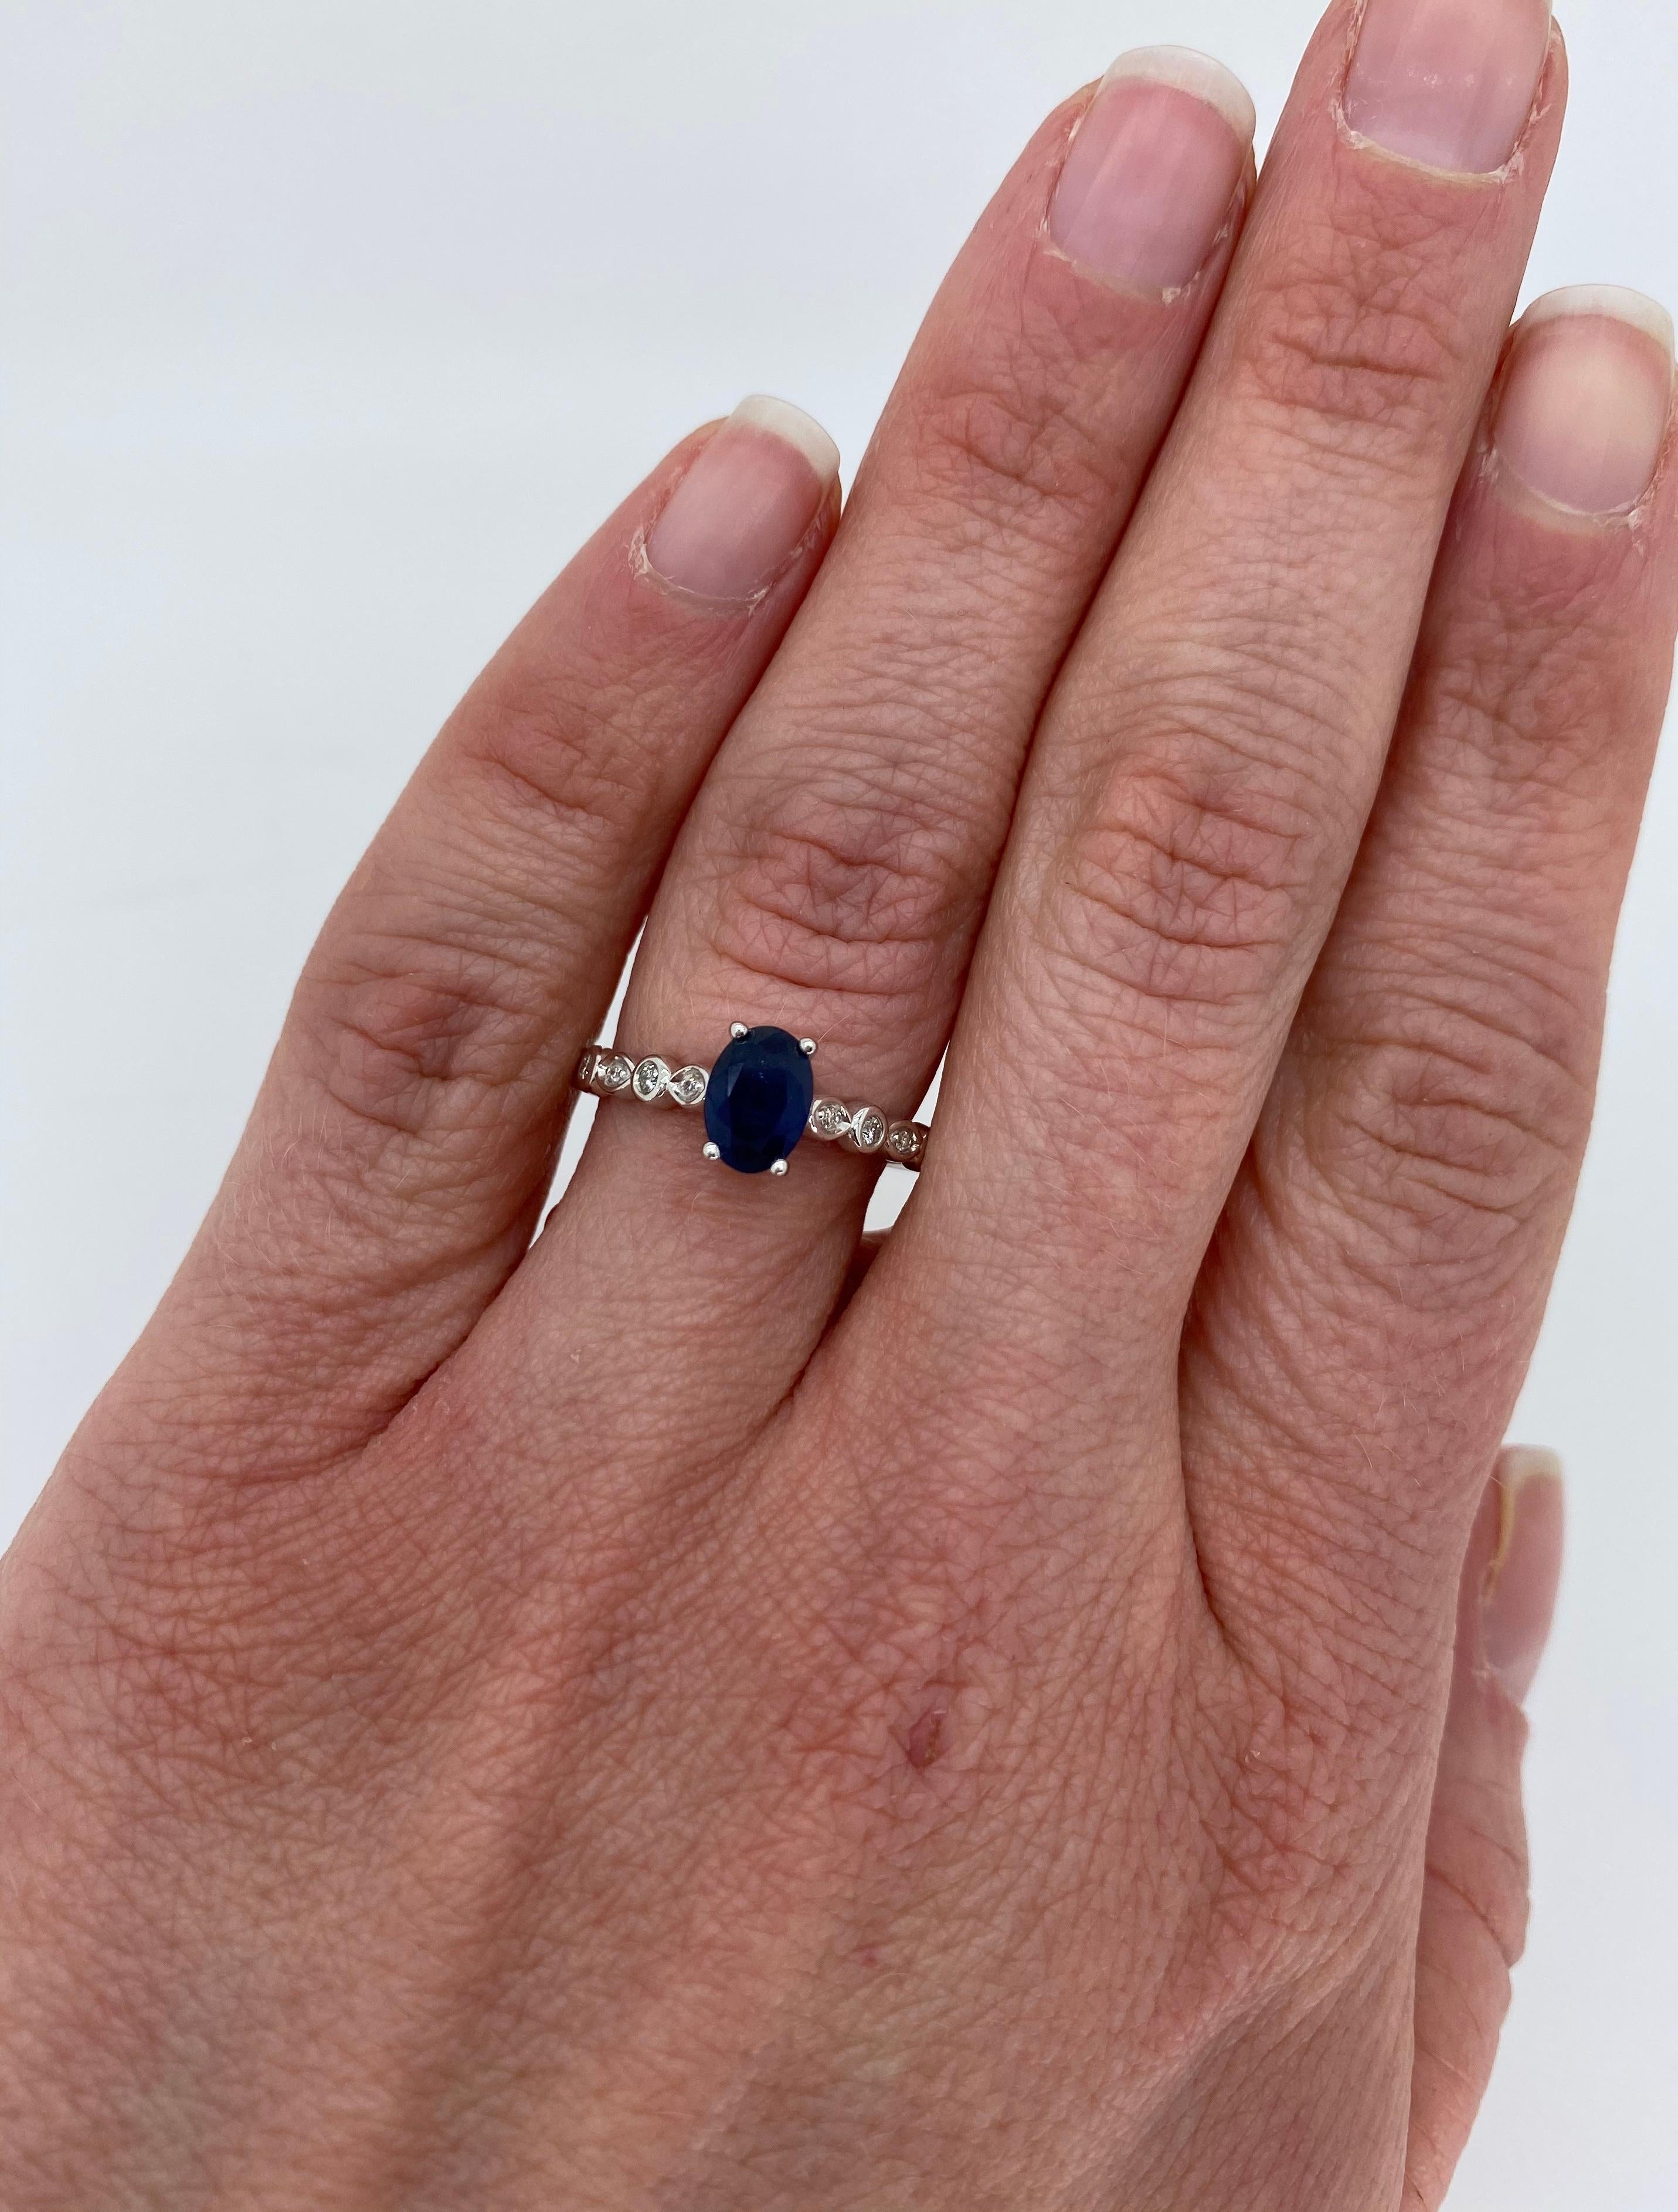 14k white gold sapphire ring with flanking diamond accents.

Gemstone: Sapphire & Diamonds
Gemstone Carat Weight:  Approximately 7.11 x 5.17mm
Diamond Carat Weight:  Approximately .10CTW
Diamond Cut: Round Brilliant Cut
Color: Average G-J
Clarity: